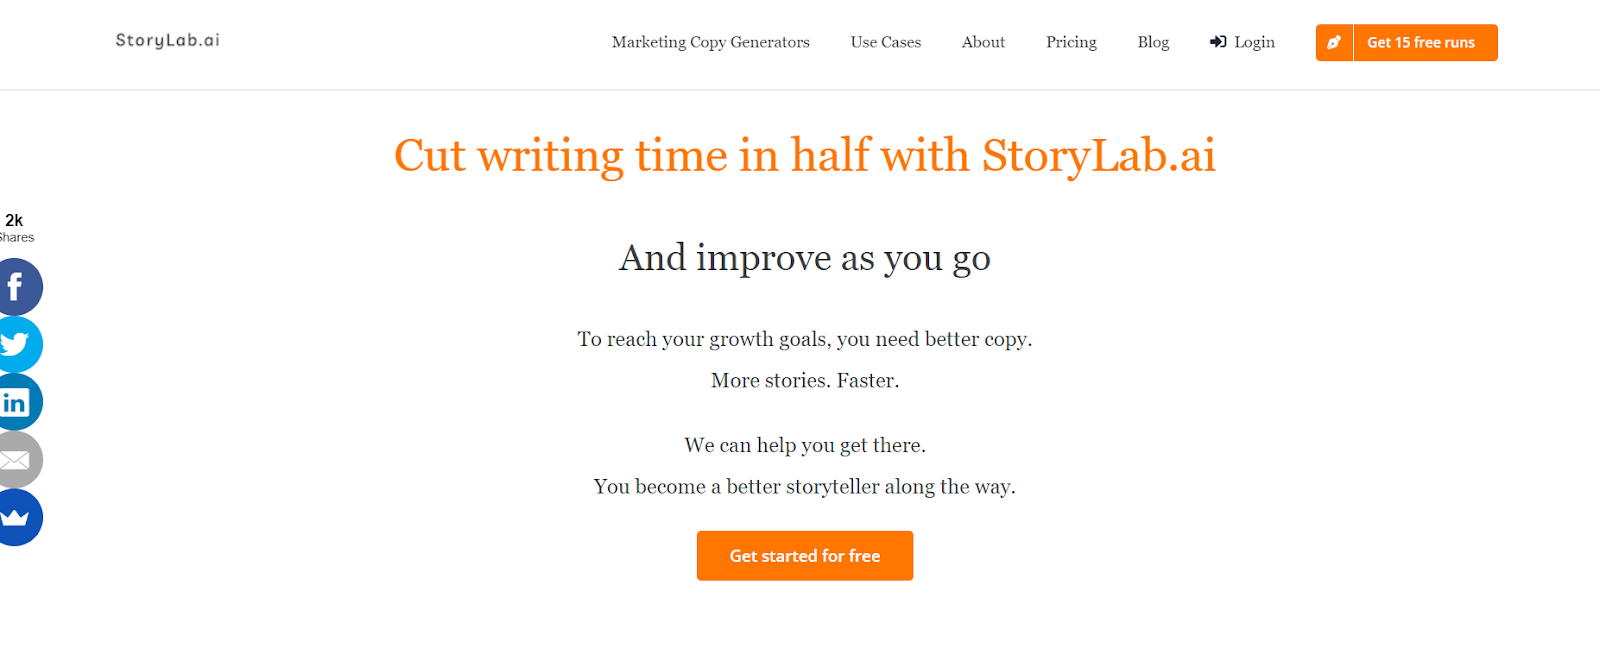 StoryLab can help you reach your goals. And along the way, StoryLab helps you become a better storyteller.